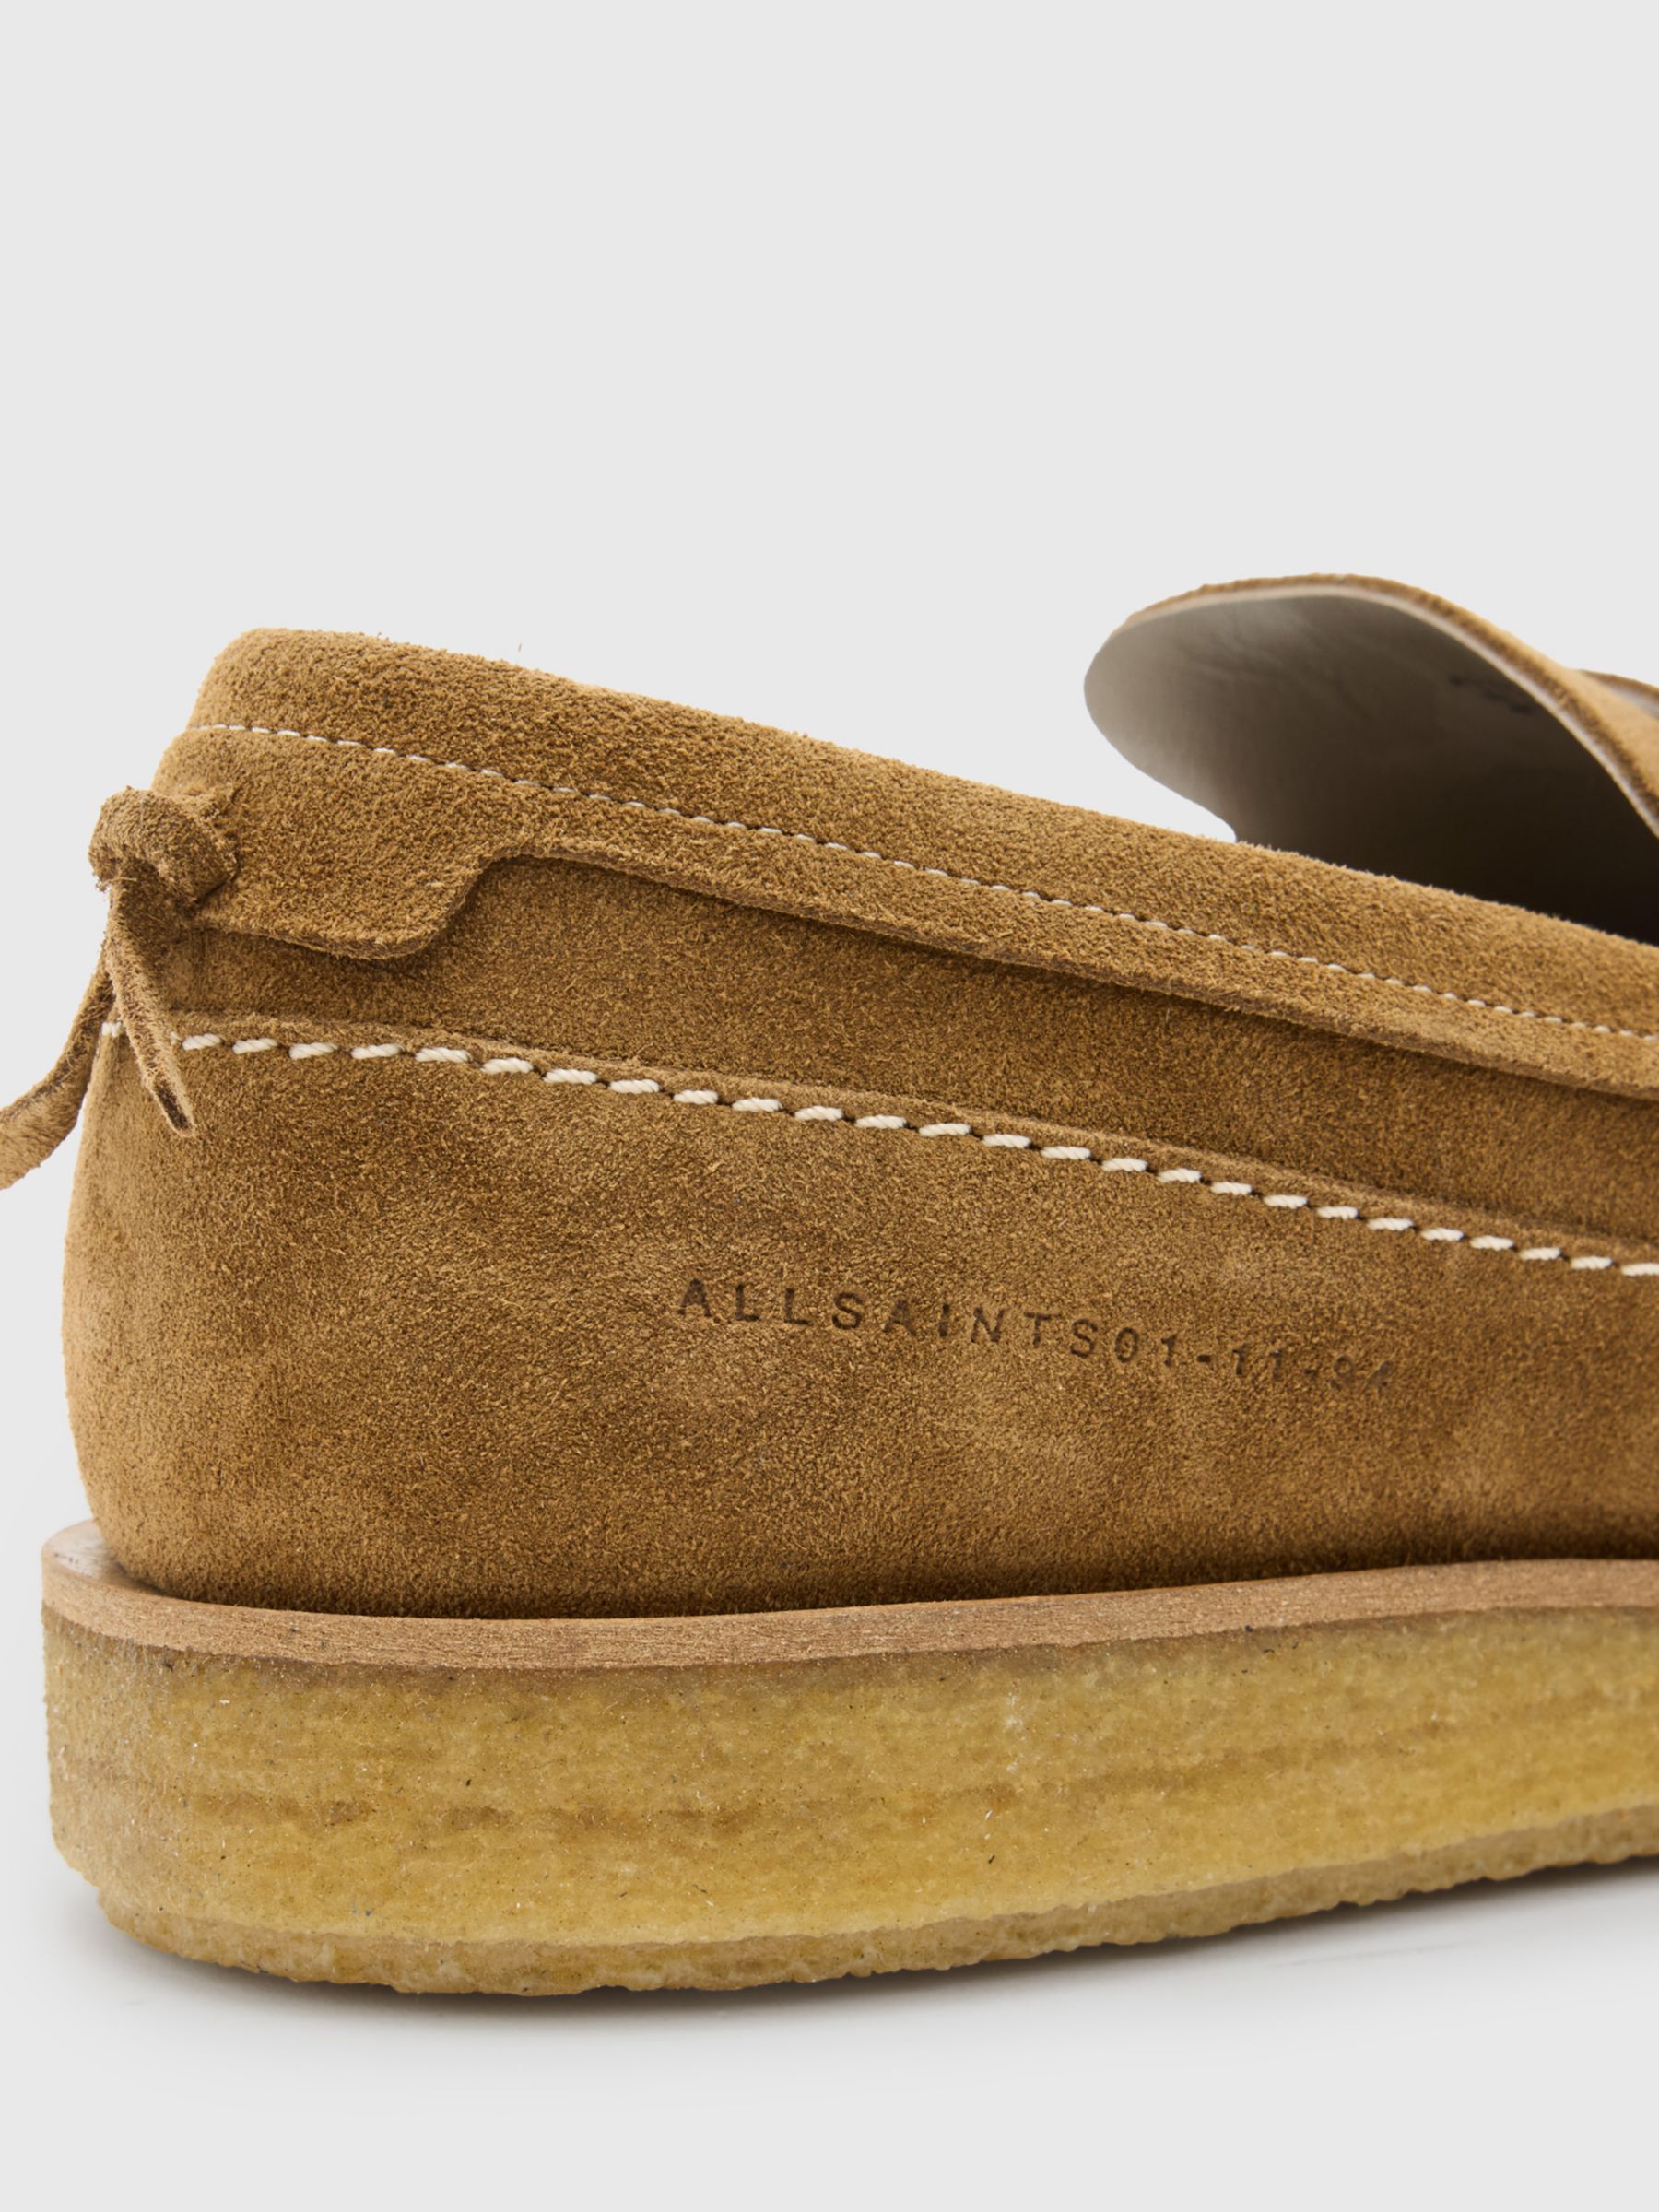 Buy AllSaints Jago Leather Loafers, Tan Online at johnlewis.com